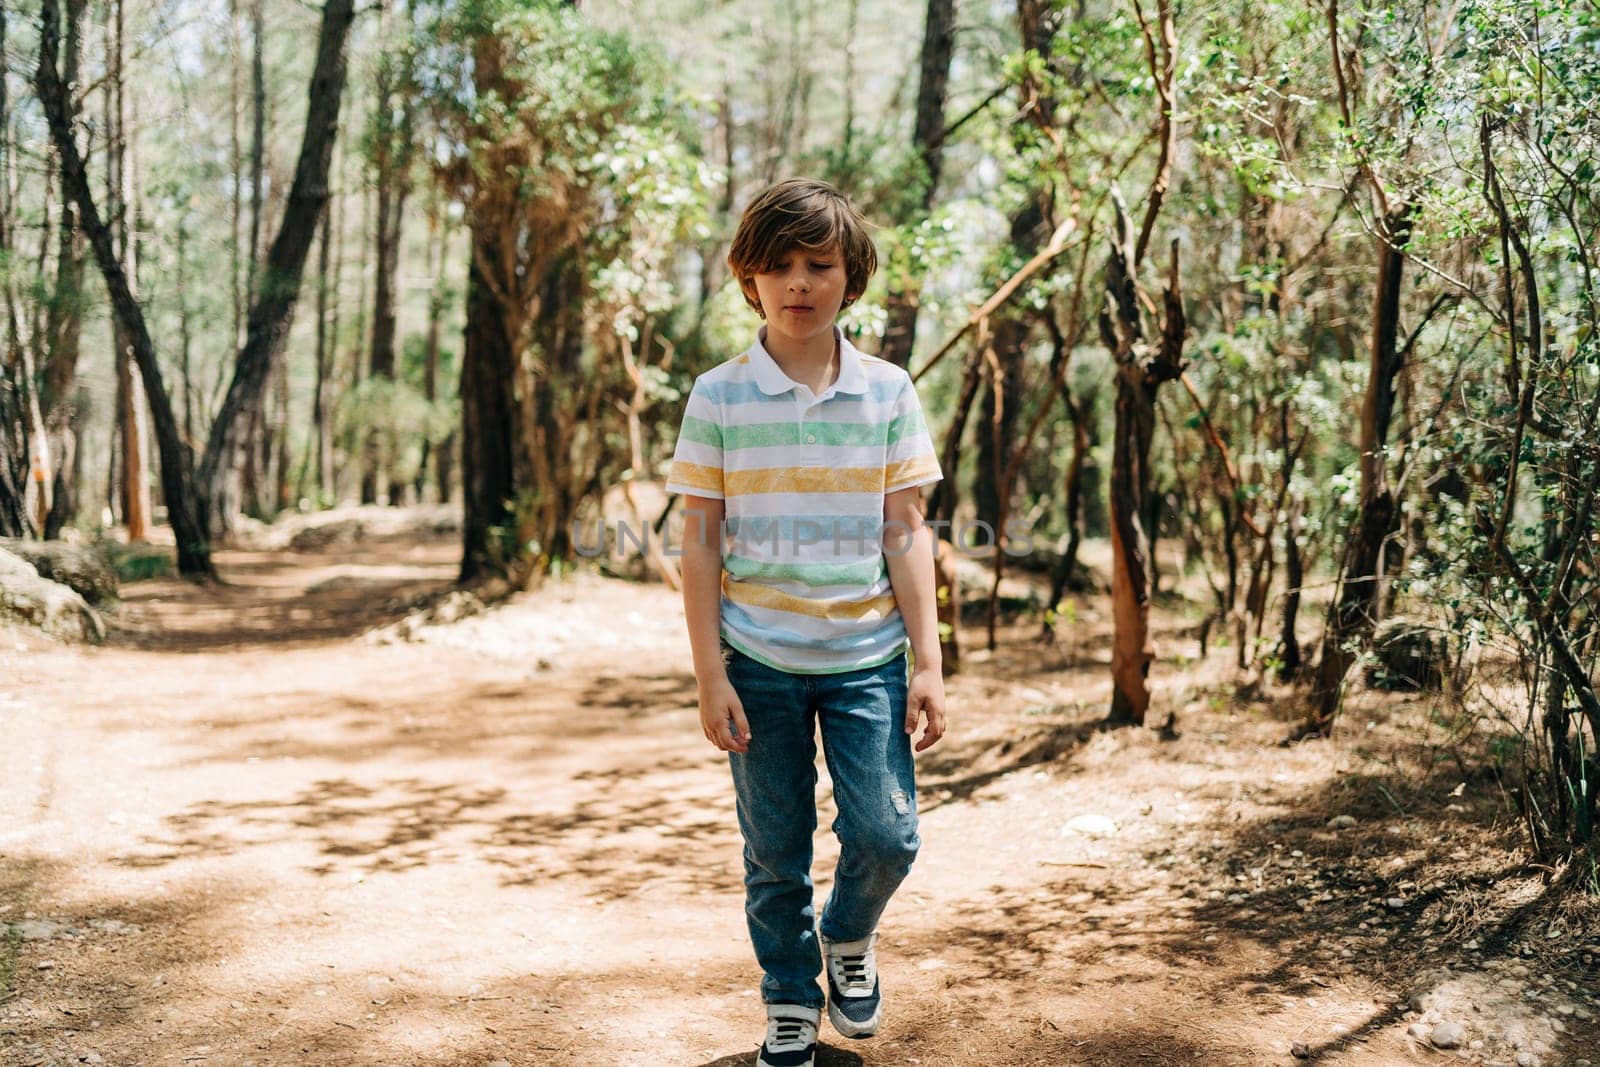 Tourist school boy kid child in a casual clothing walking in the summer greenwood leaf forest with rocky boulders stones all around the place. by Ostanina